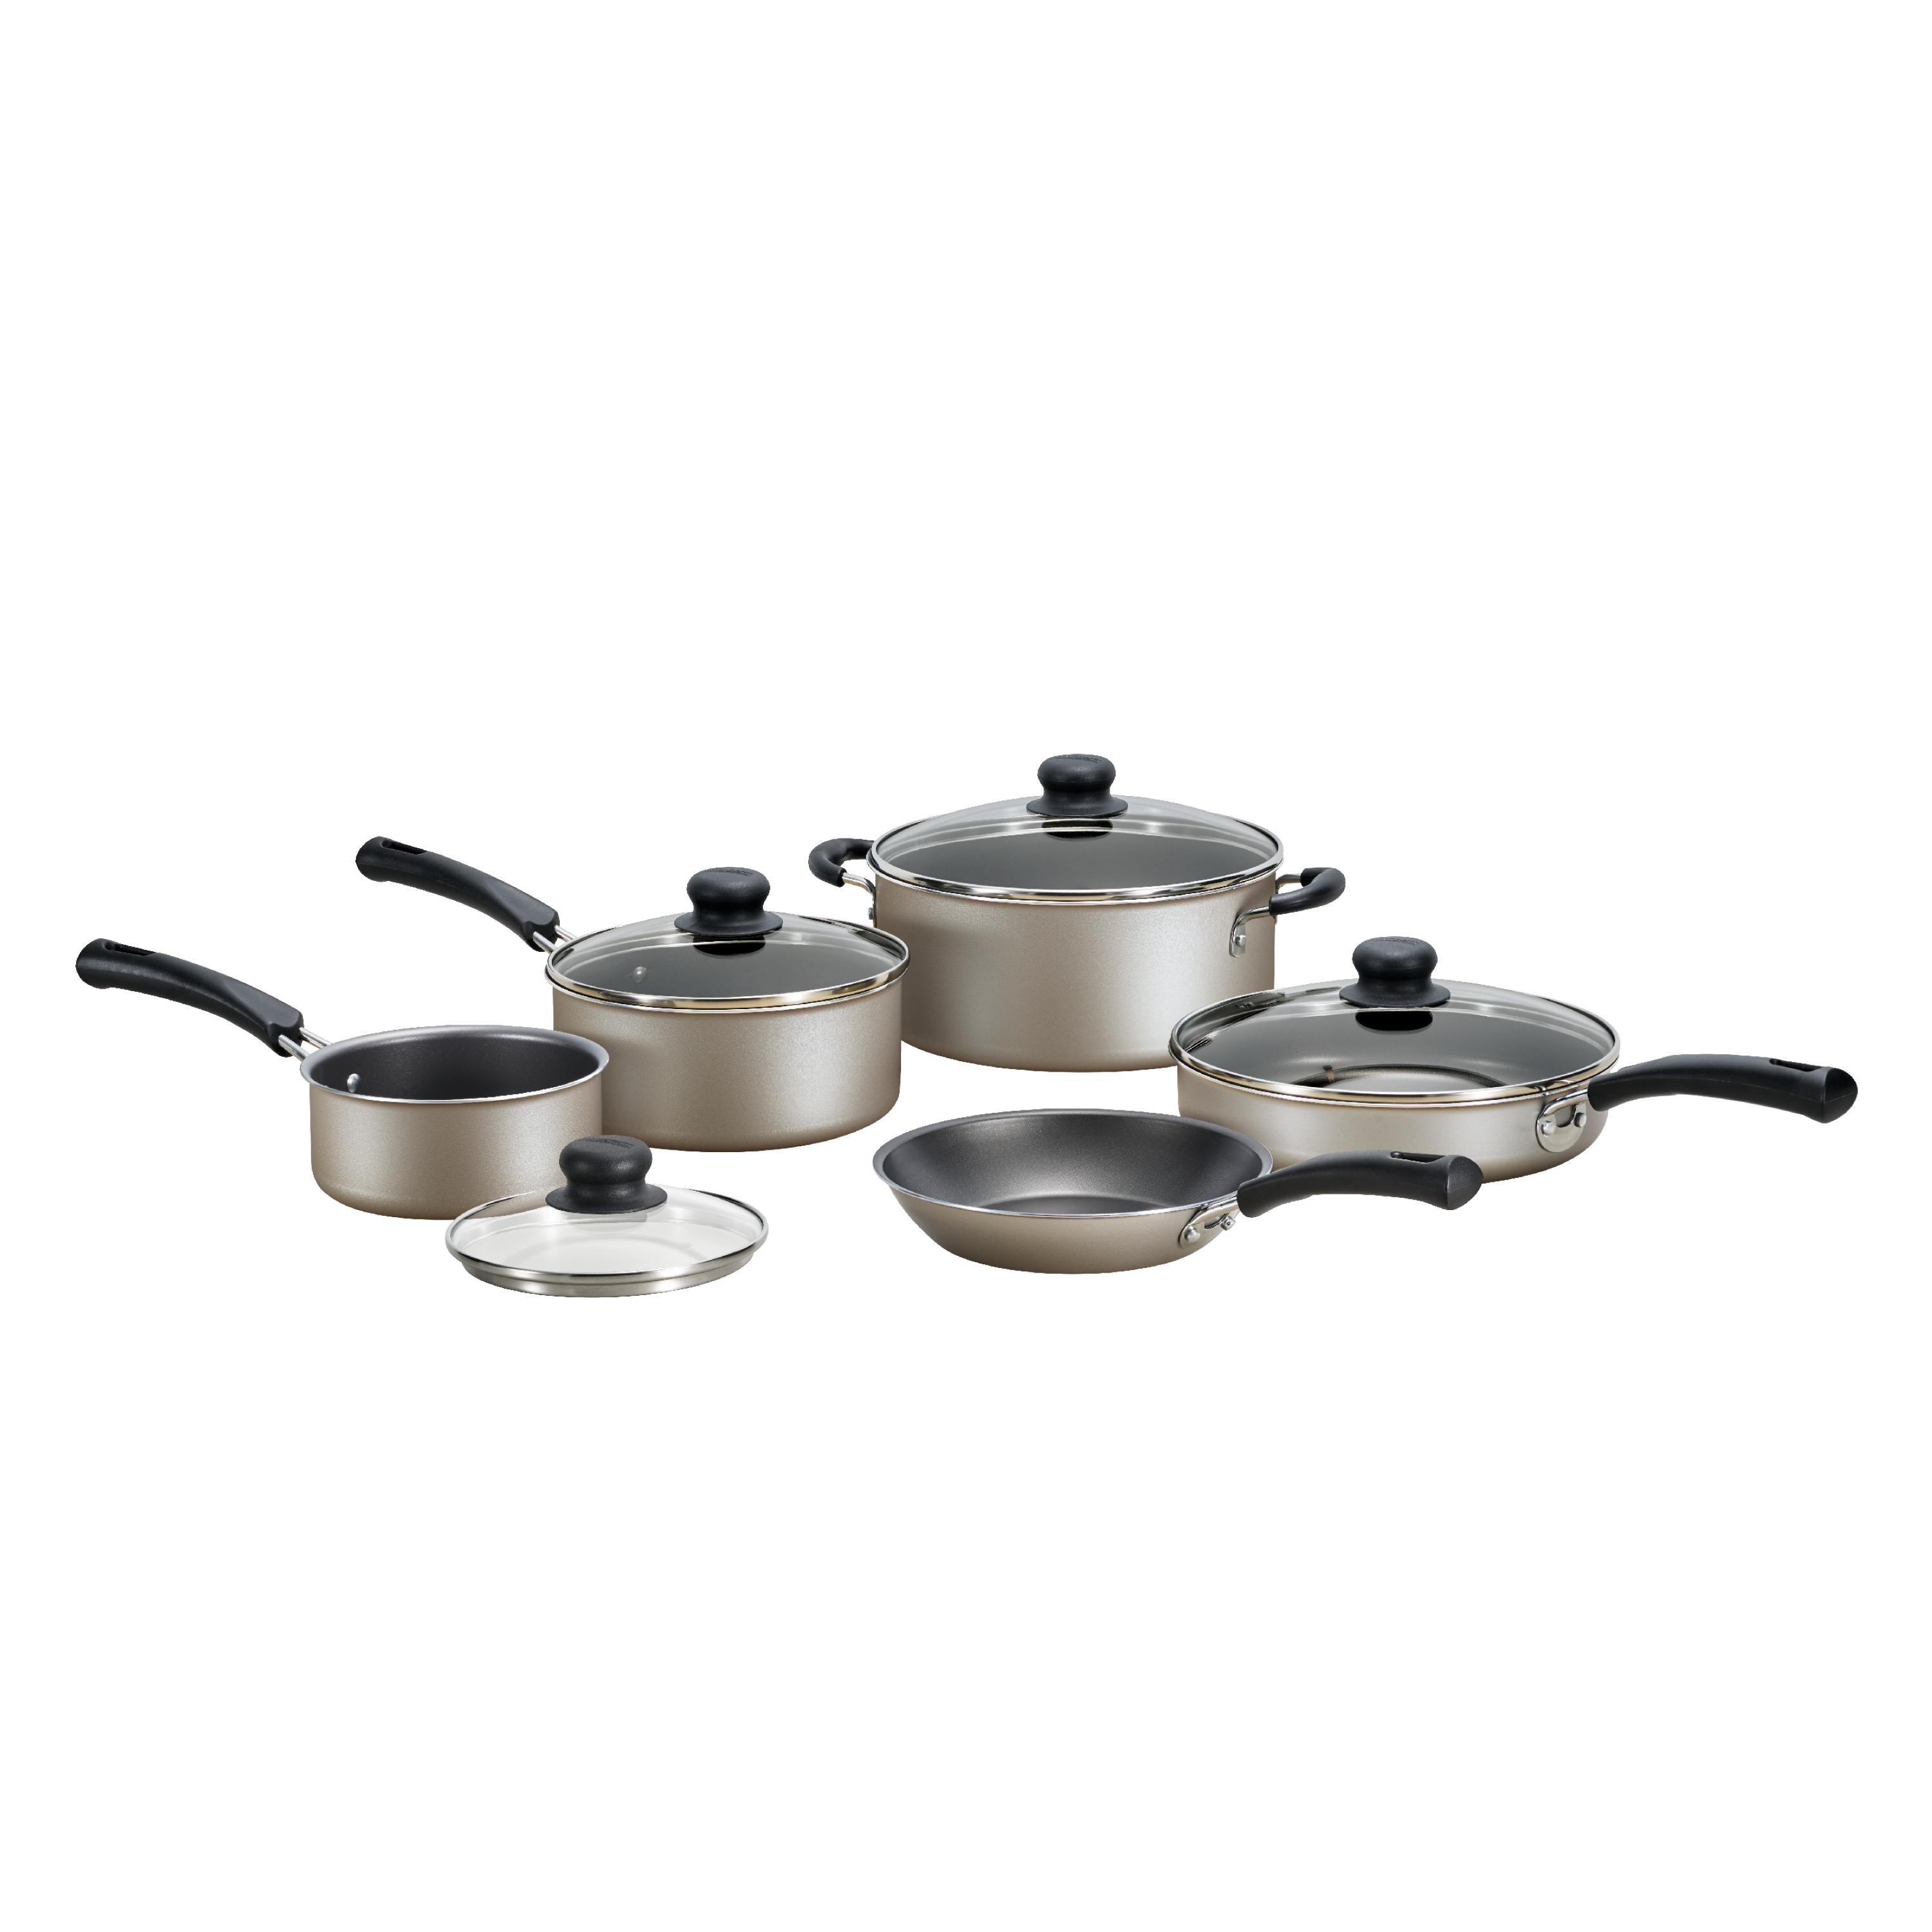 Tramontina 9-Piece Non-Stick Cookware Set, Champagne - image 4 of 21